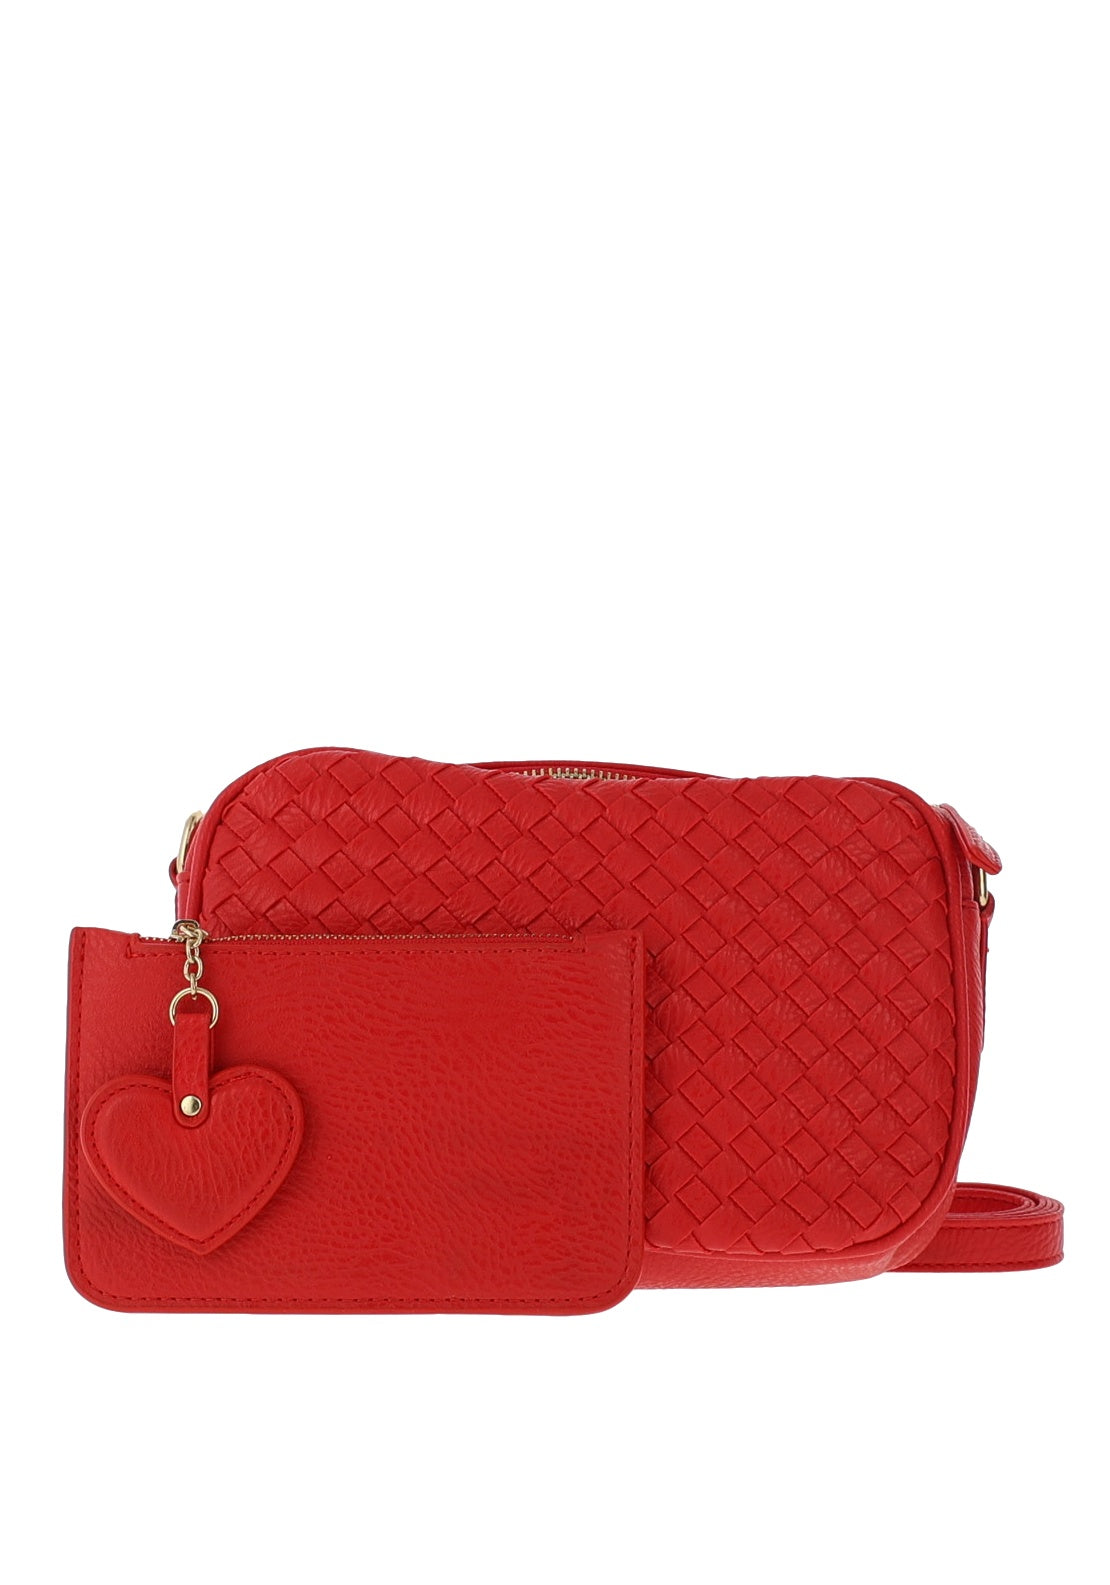 Guess Girls Quilted Crossbody Bag, Red - McElhinneys